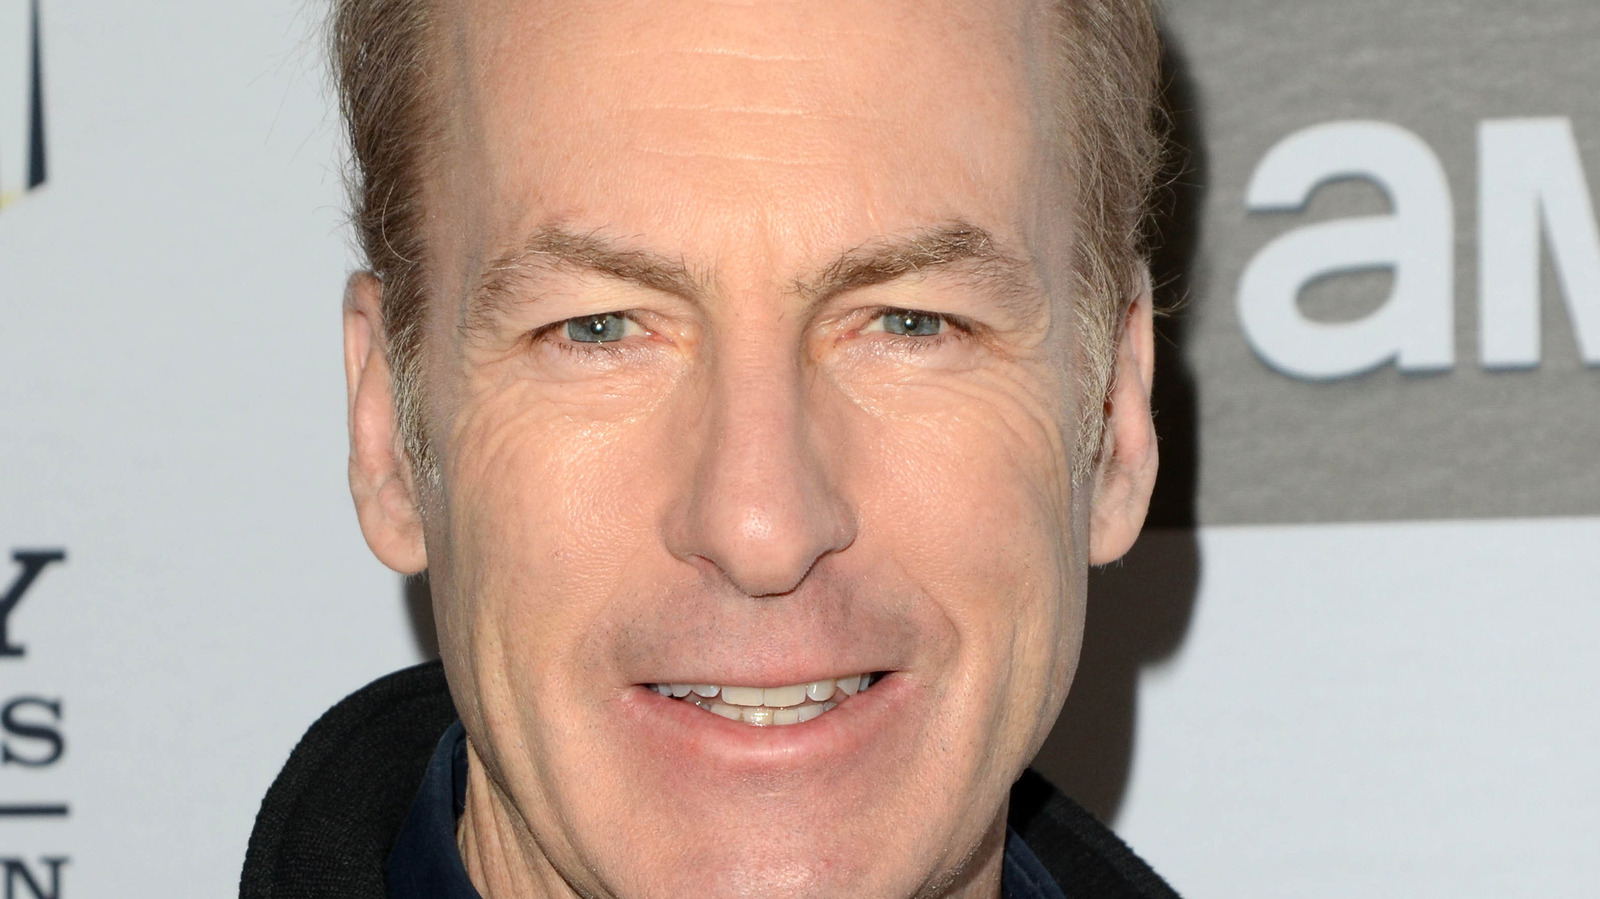 Bob Odenkirk Opens Up About Collapsing On Set Due To Heart Incident